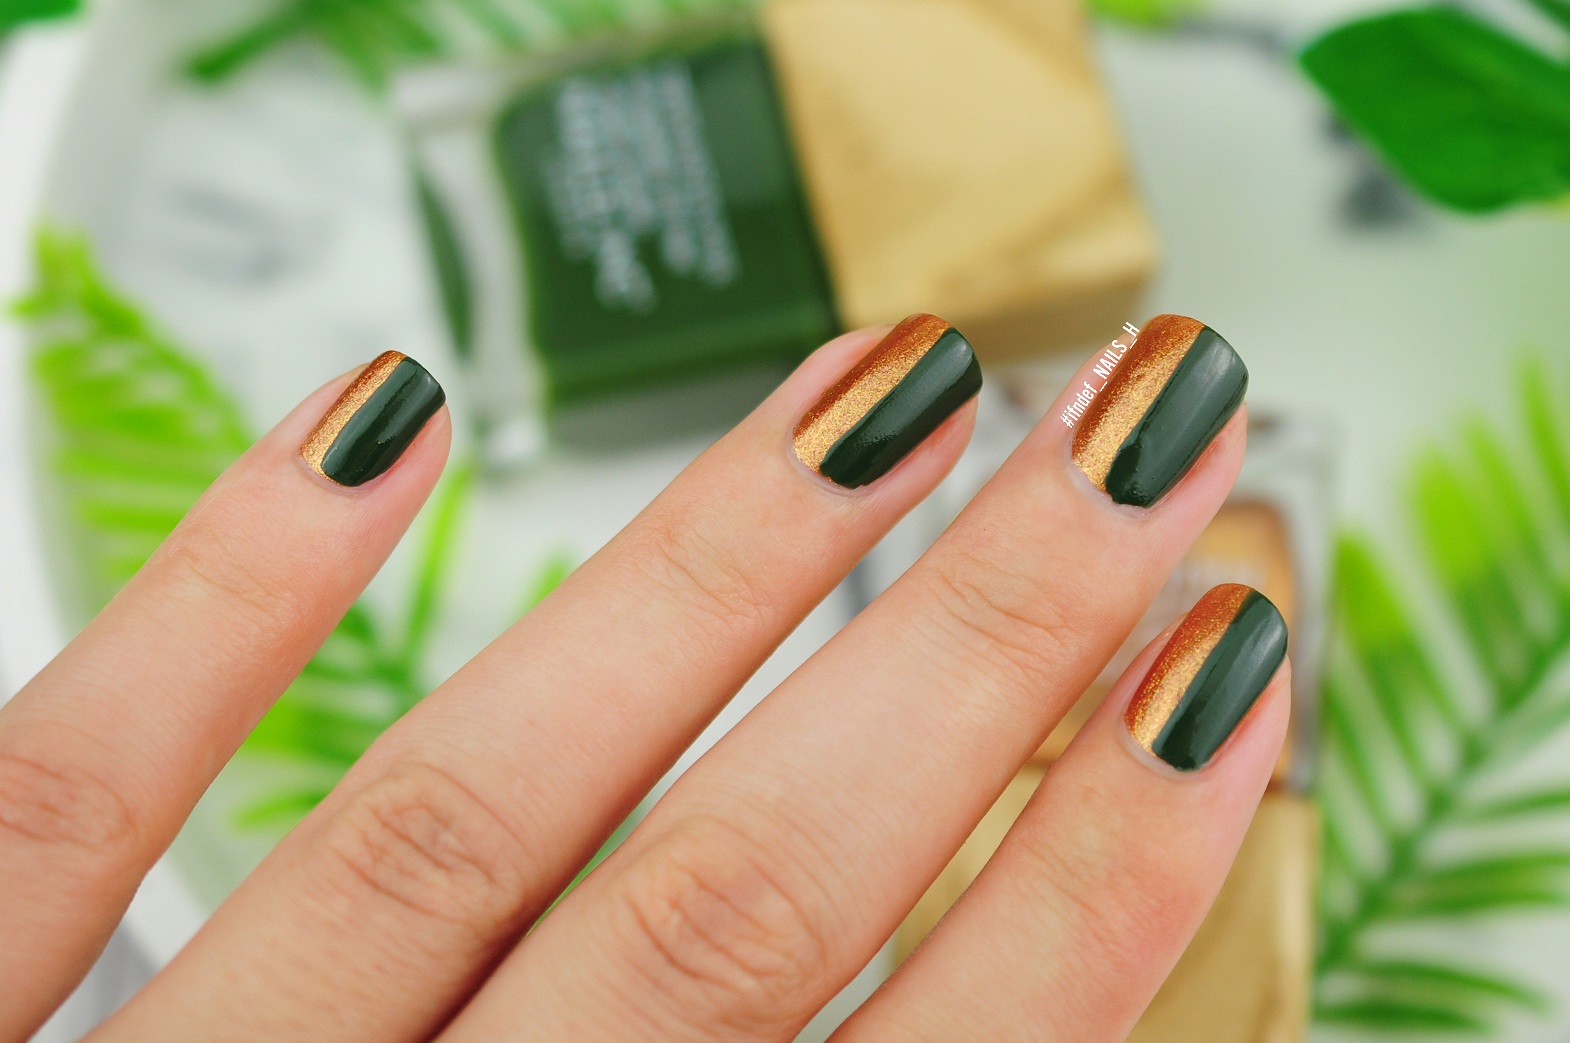 1 Nails Inc Don't Stop Be-leafing Duo Swatches Palms In the Air Grow Your Eco